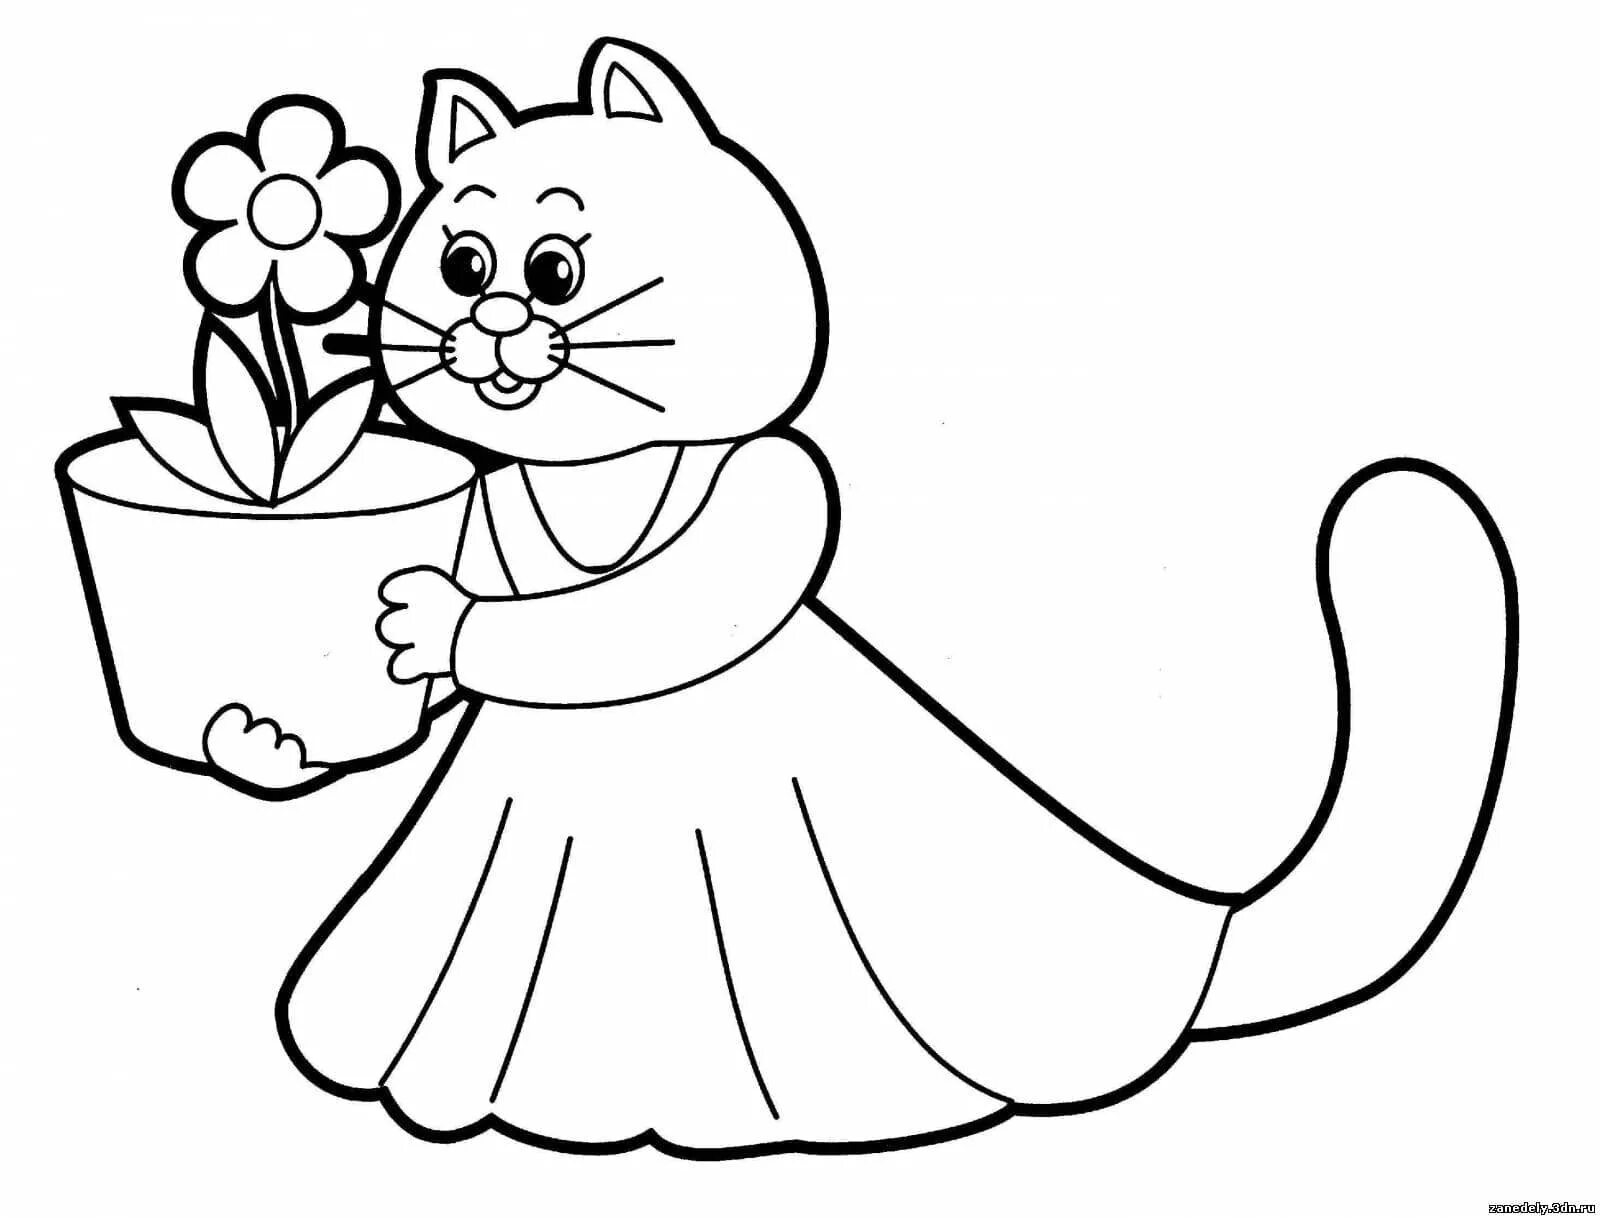 Innovative coloring page 4 for girls